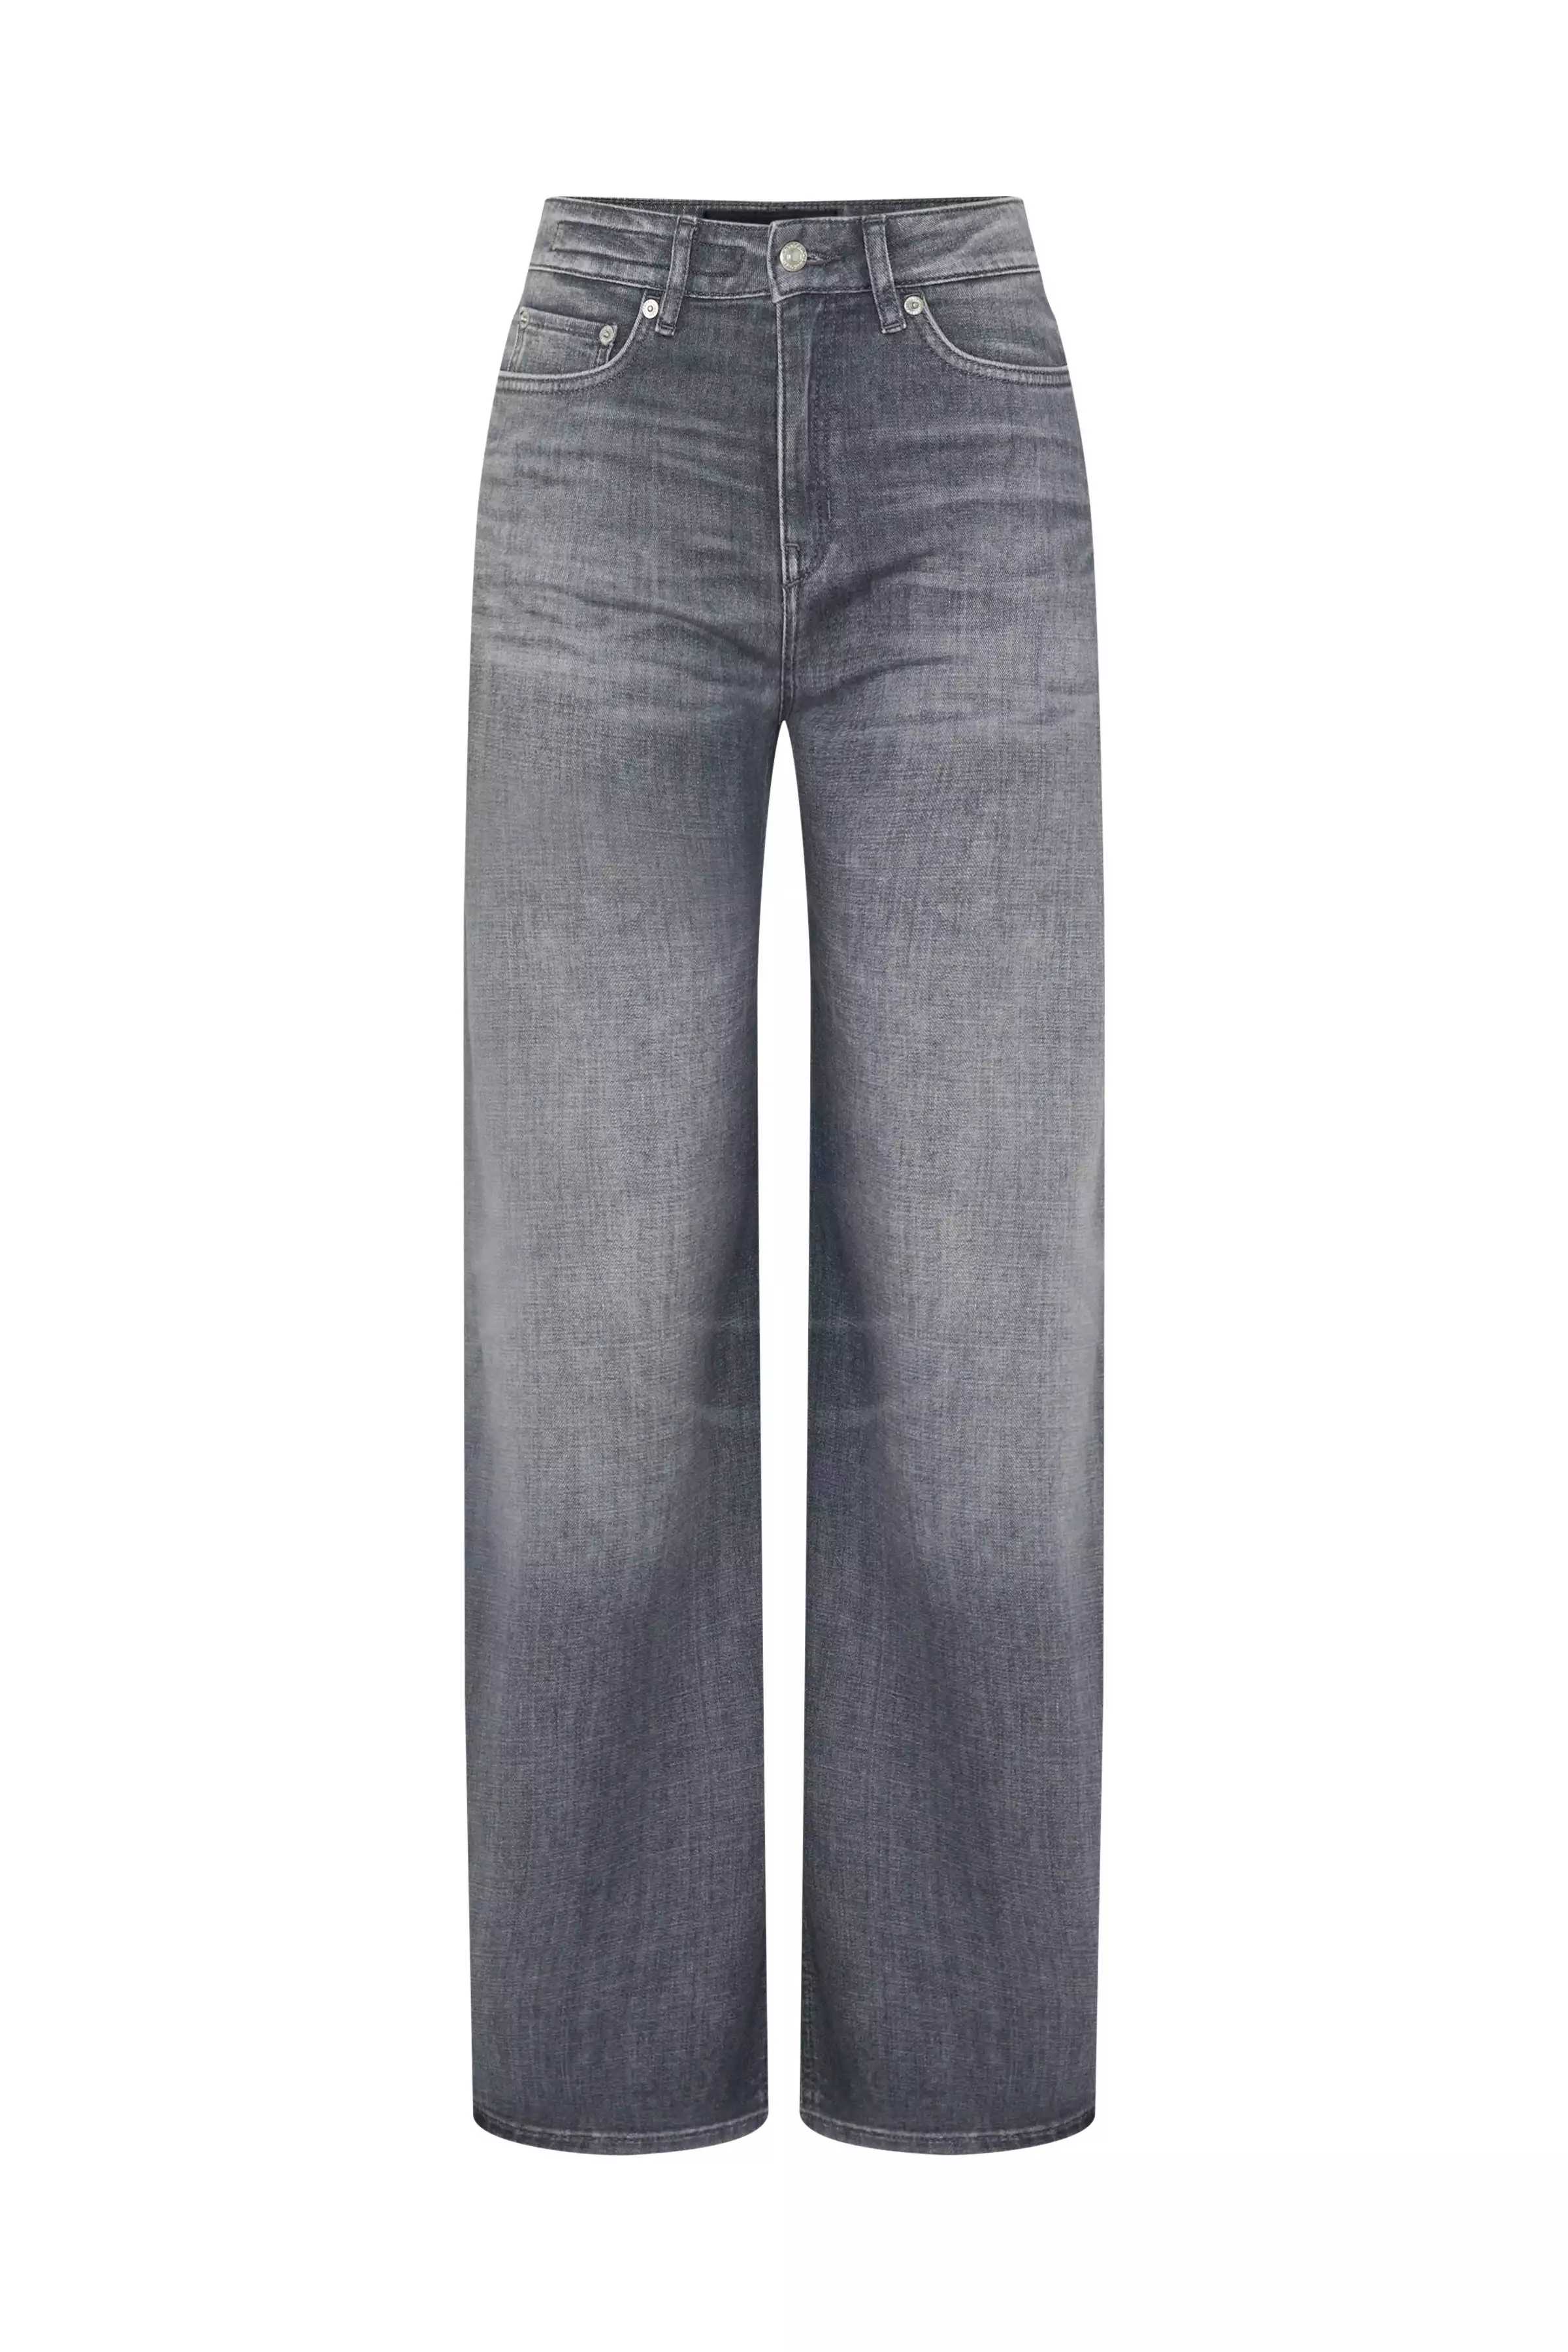 mid-waist jeans in soft-touch denim with used effects